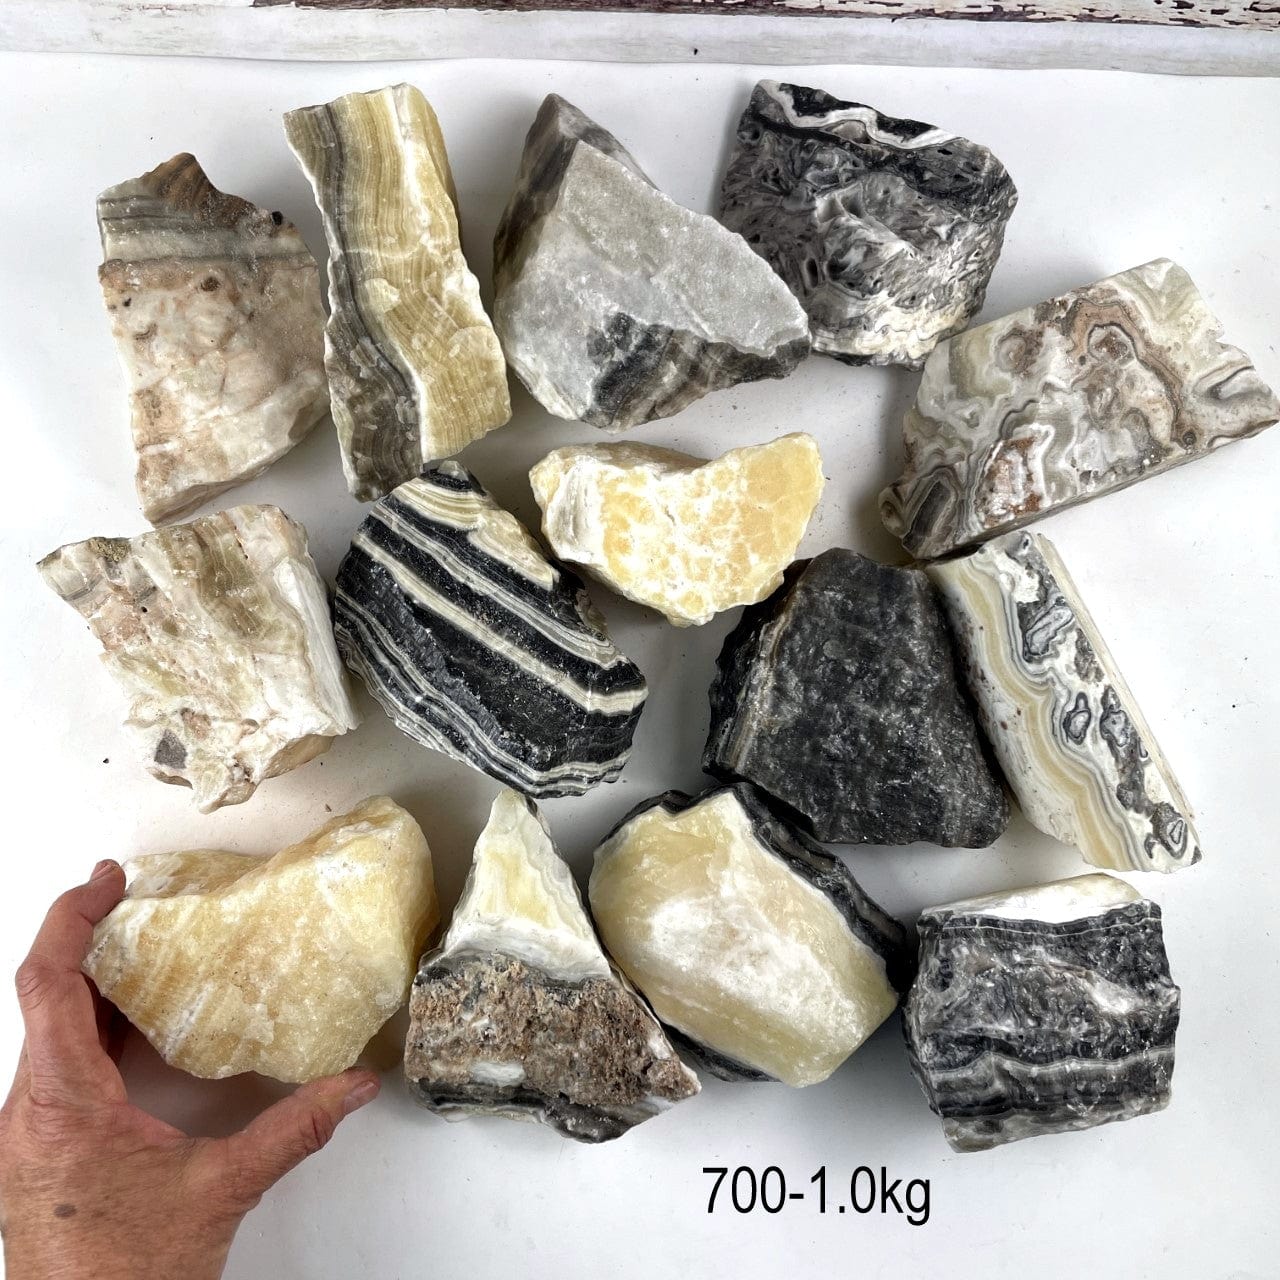 Mexican Onyx Rough Stone Chunks in the size .700-1.0kg size with a hand for size reference